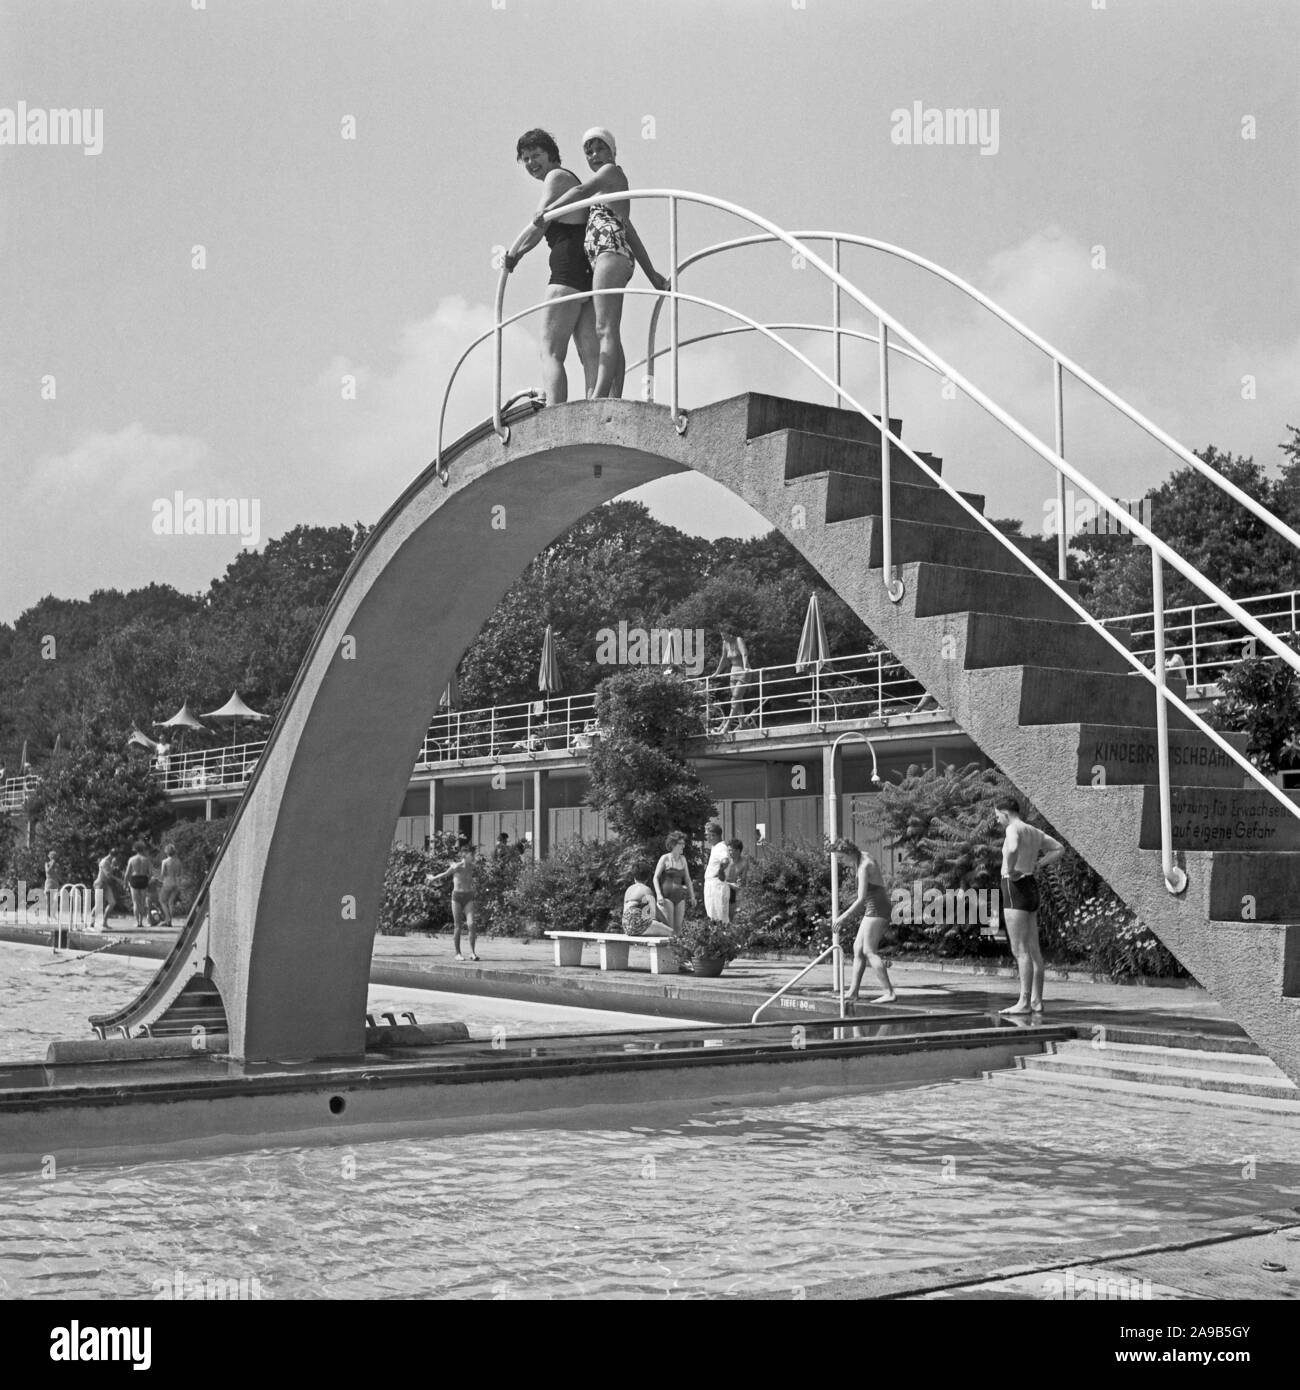 Afternoon relaxing at Neroberg hill in the North of Wiesbaden, Germany 1950s. Stock Photo